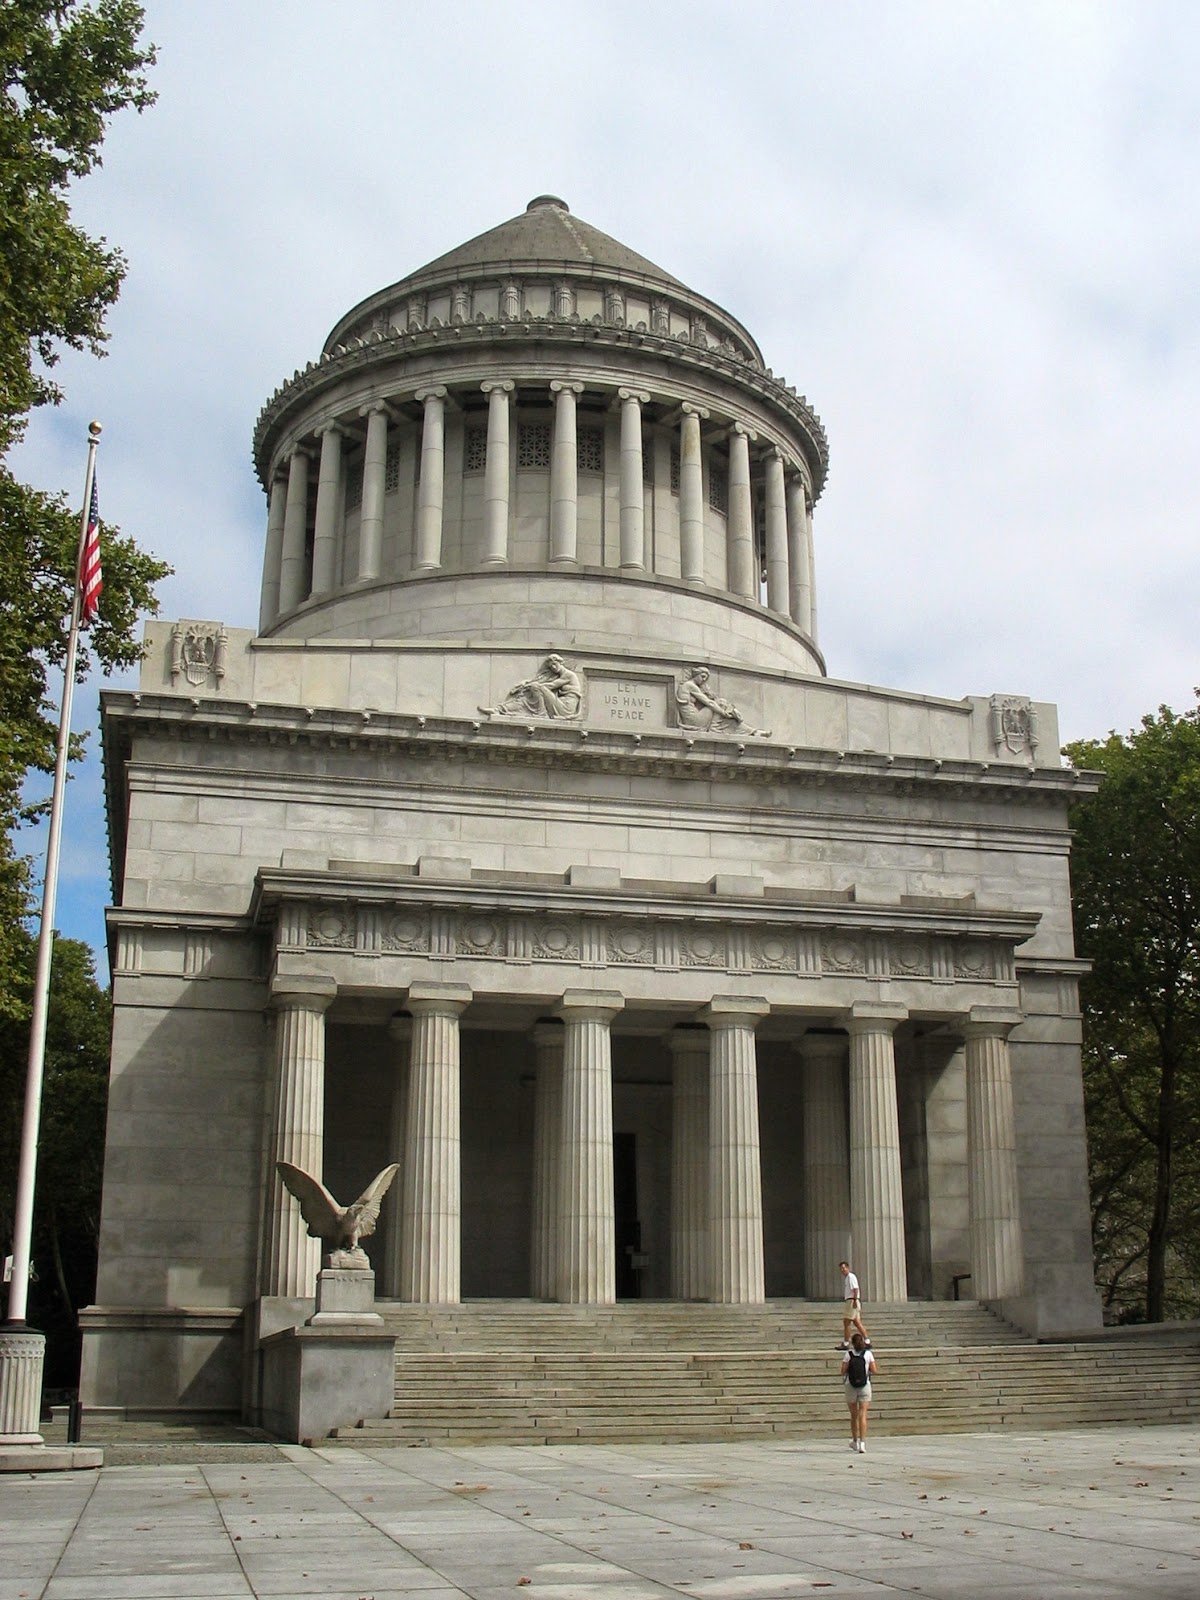 Spend Unforgettable Time in New York - General Grant National Memorial